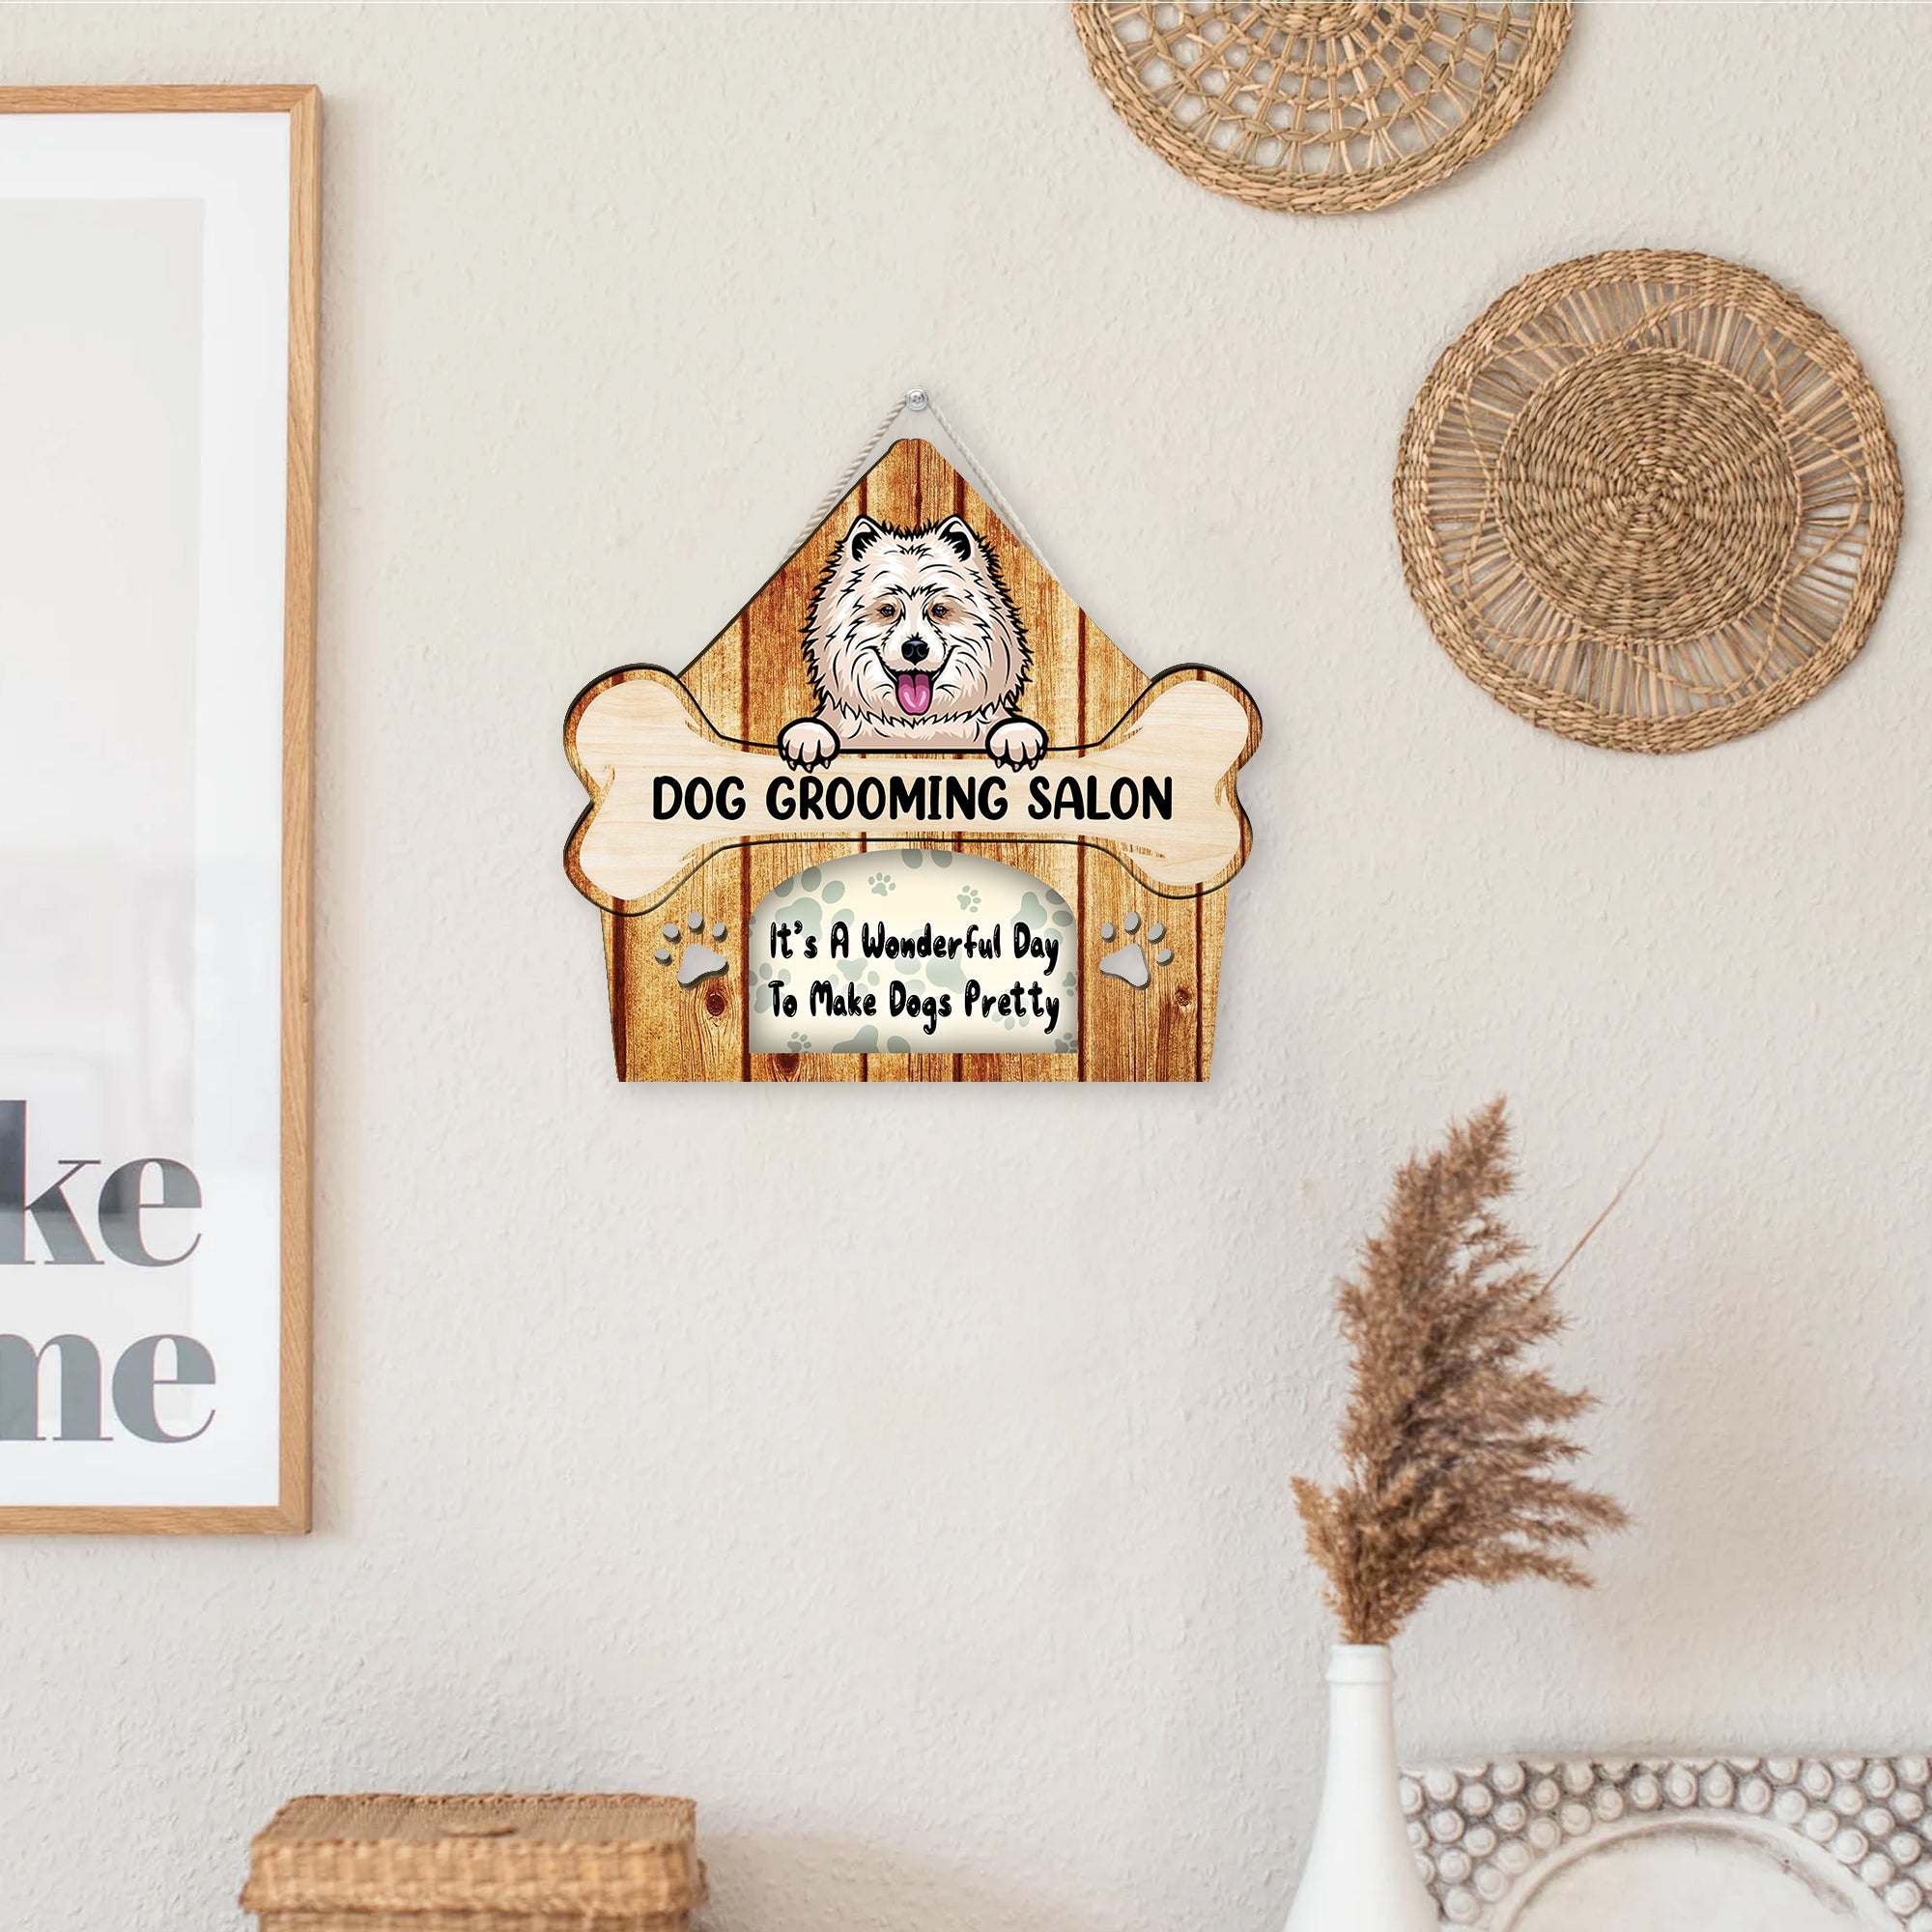 WELCOME TO DOG GROOMING SALON, IT’S A WONDERFUL DAY, TO MAKE DOGS PRETTY - CUSTOM SHAPED WOODEN SIGN